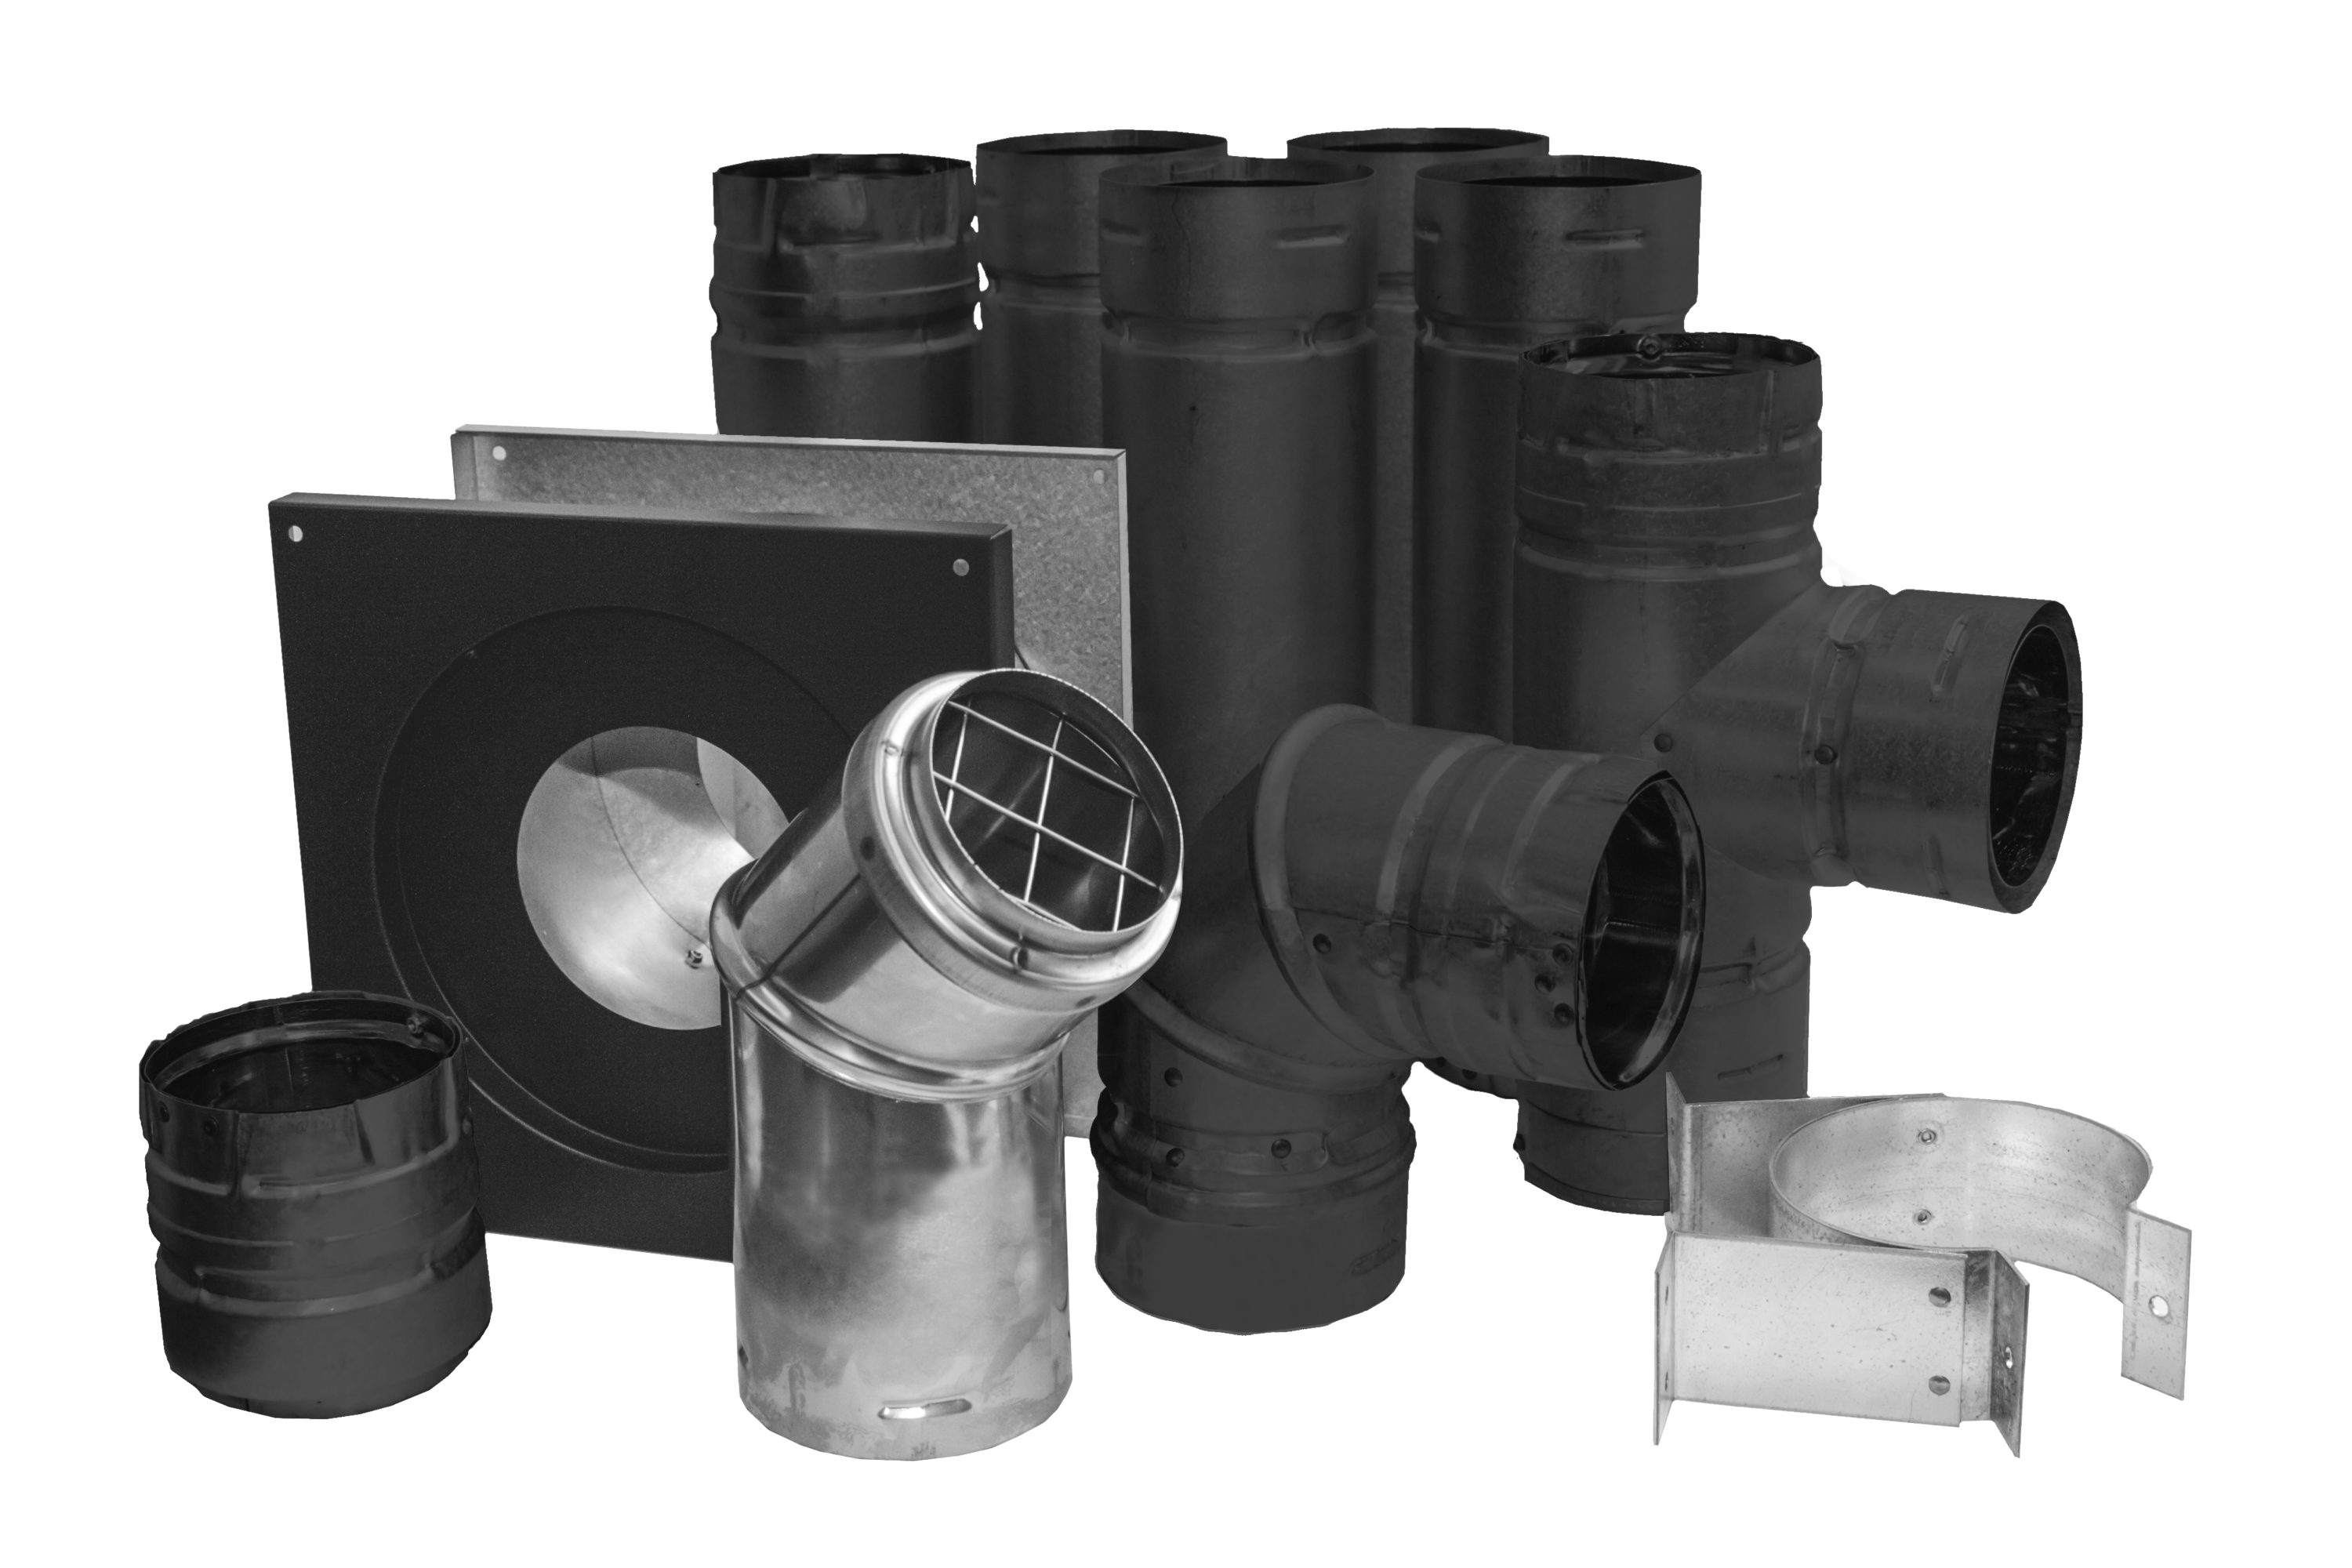 3 Pellet Stove Vent Pipe Kit For Short Horizontal Installs With Dura Vent  Pro Pipe.